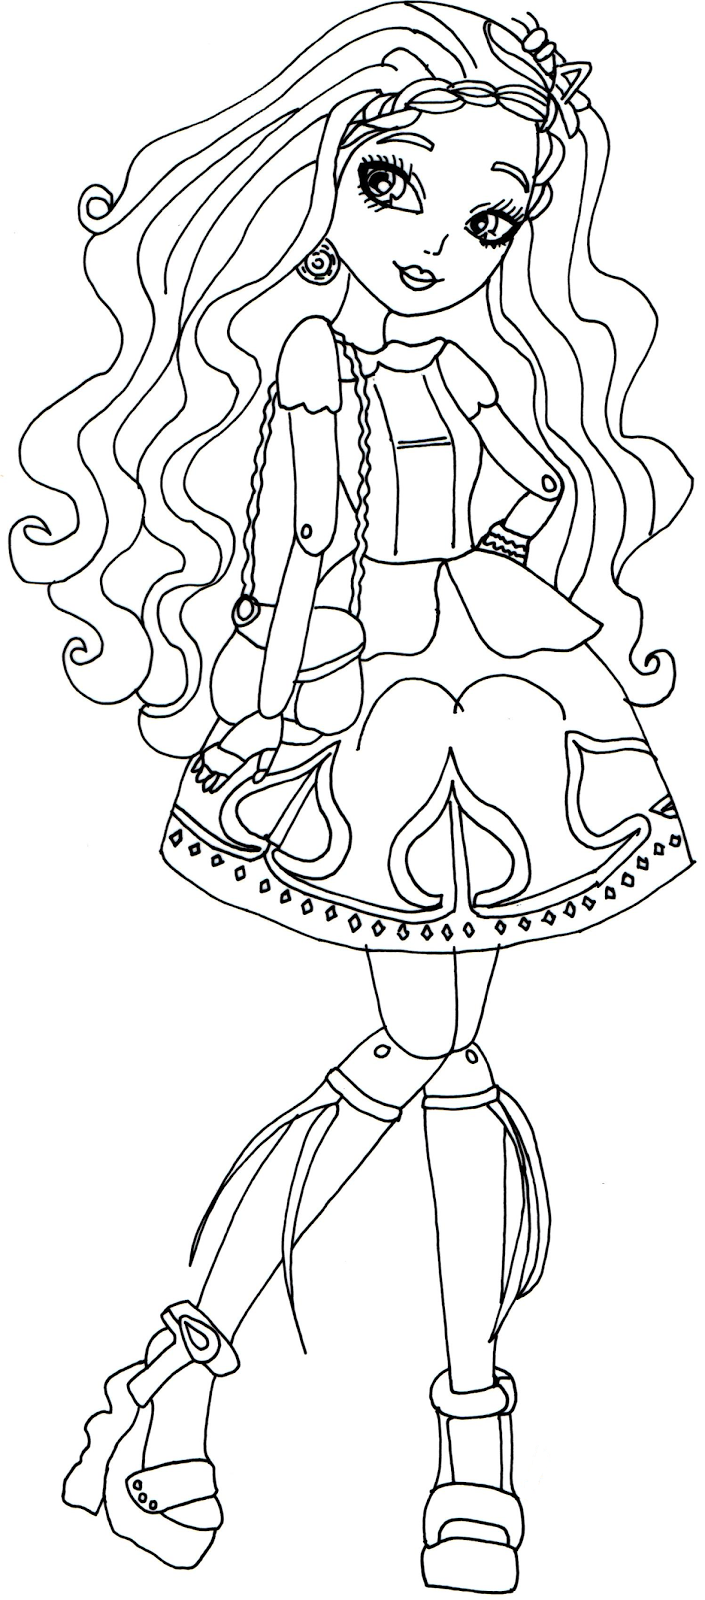 Free Printable Ever After High Coloring Pages